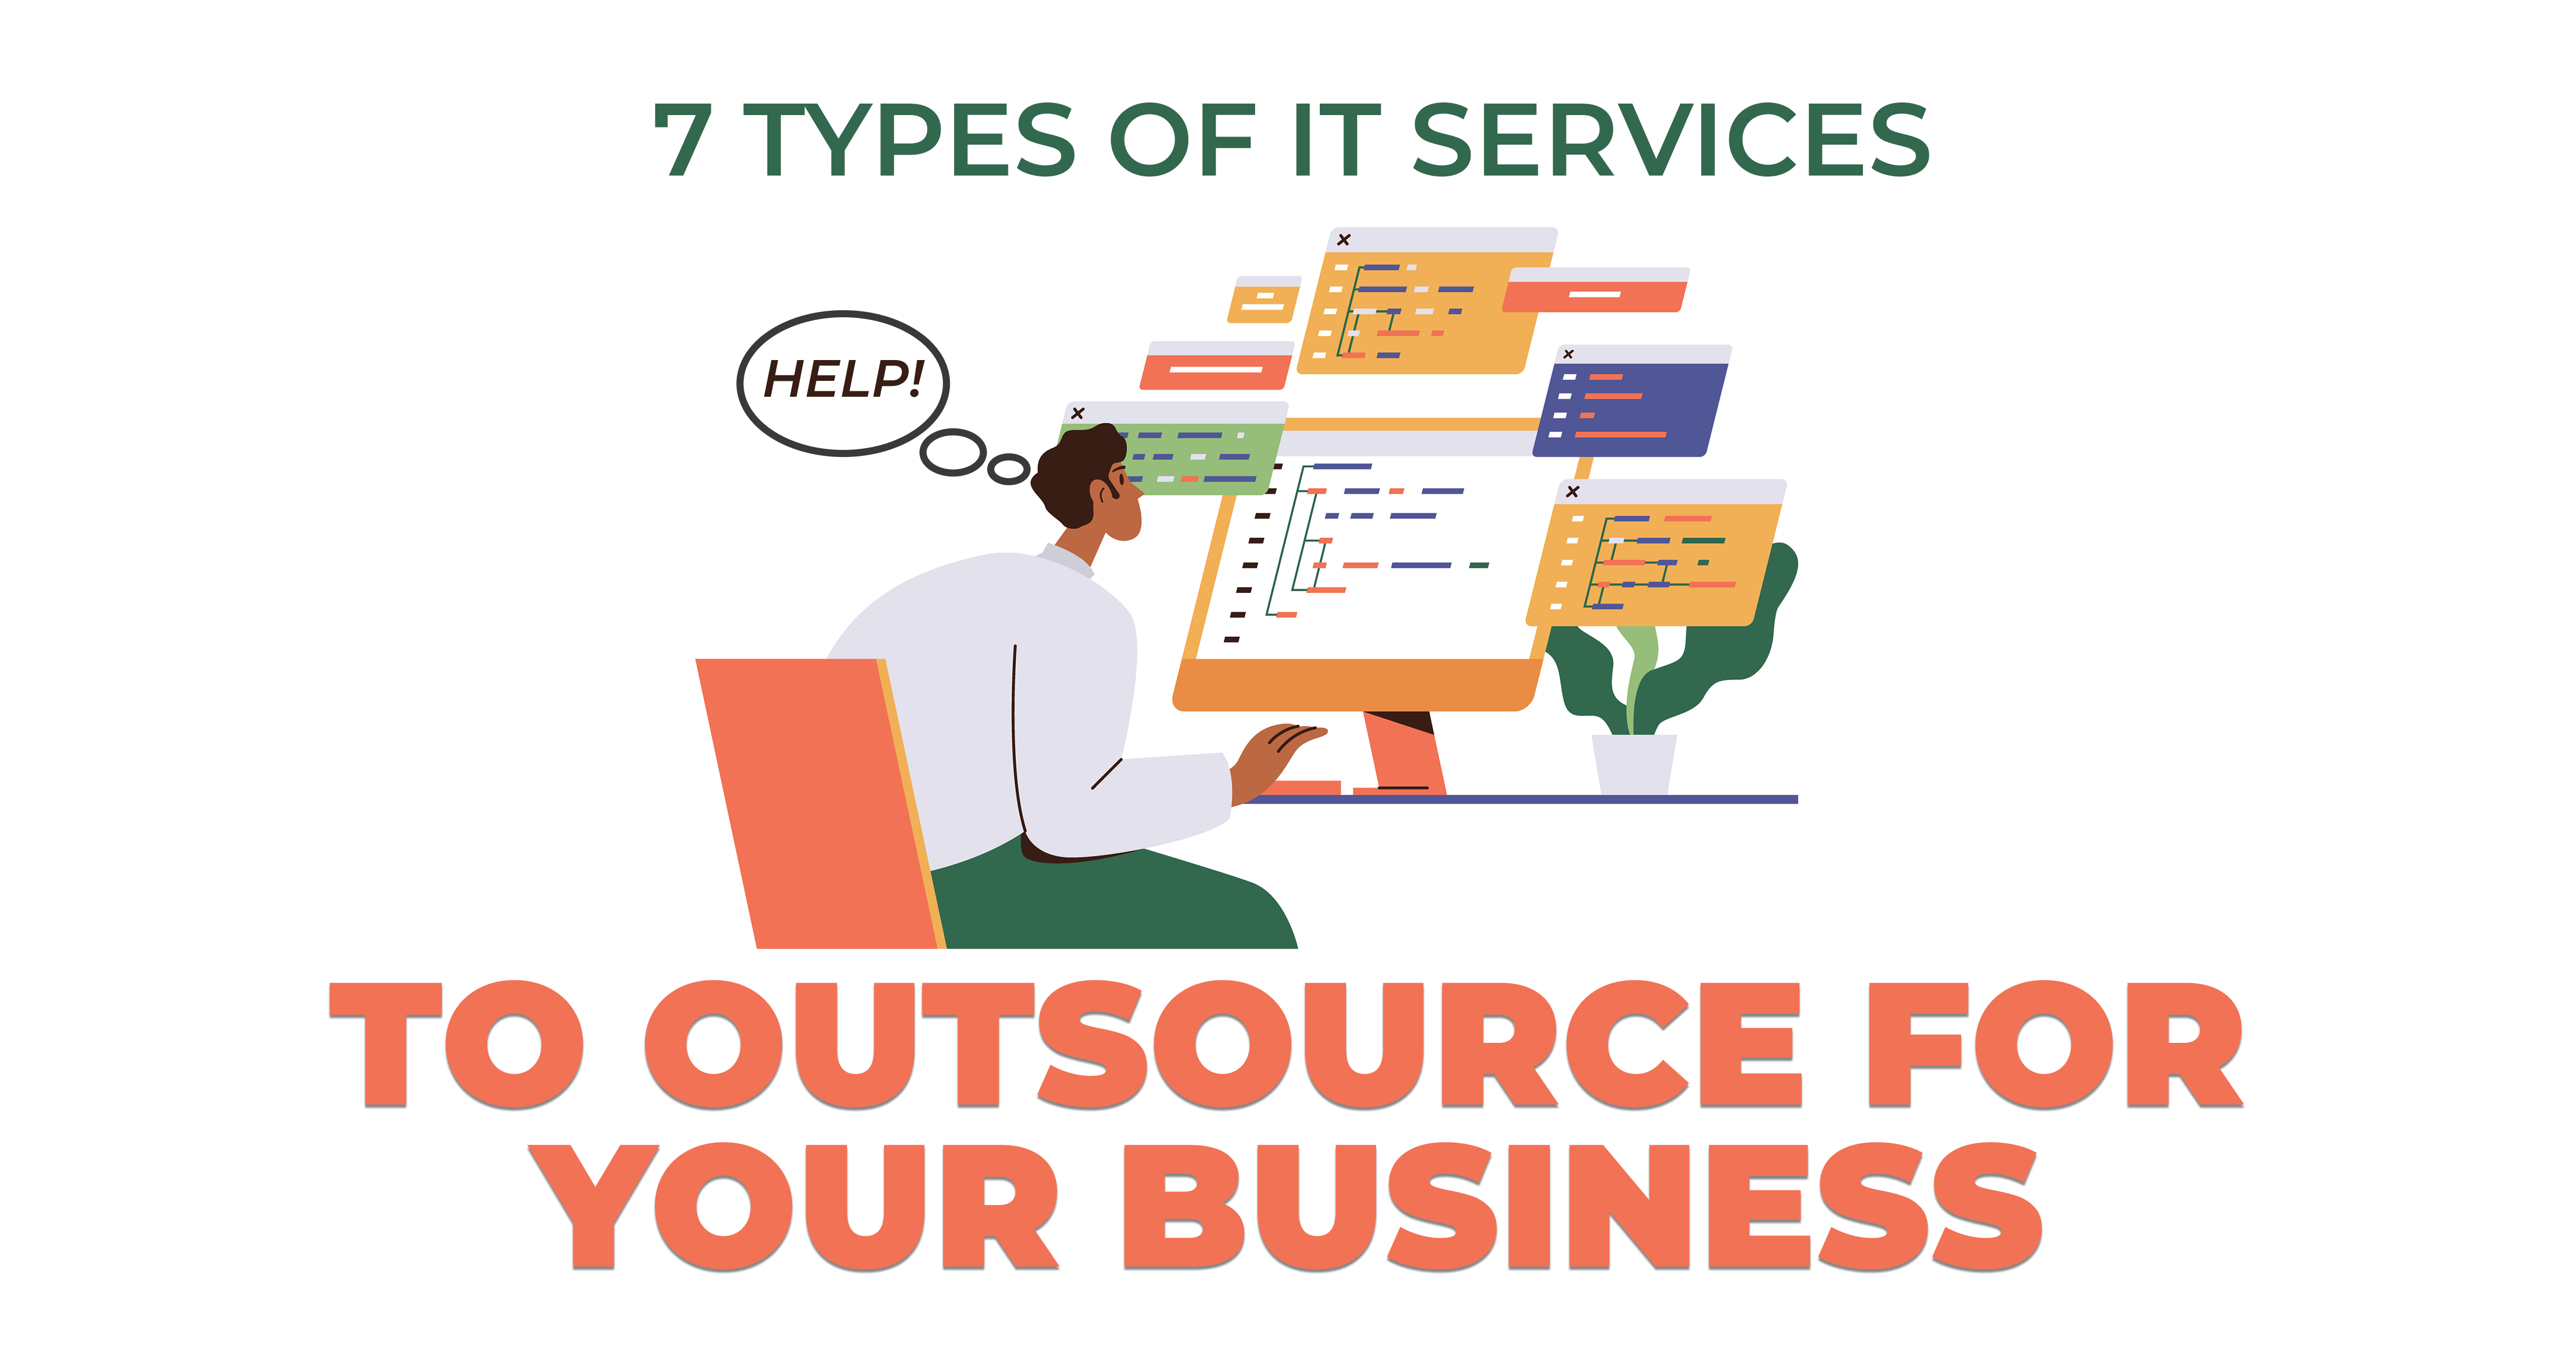 7 Types of IT Sercives to Outsource for Your Business